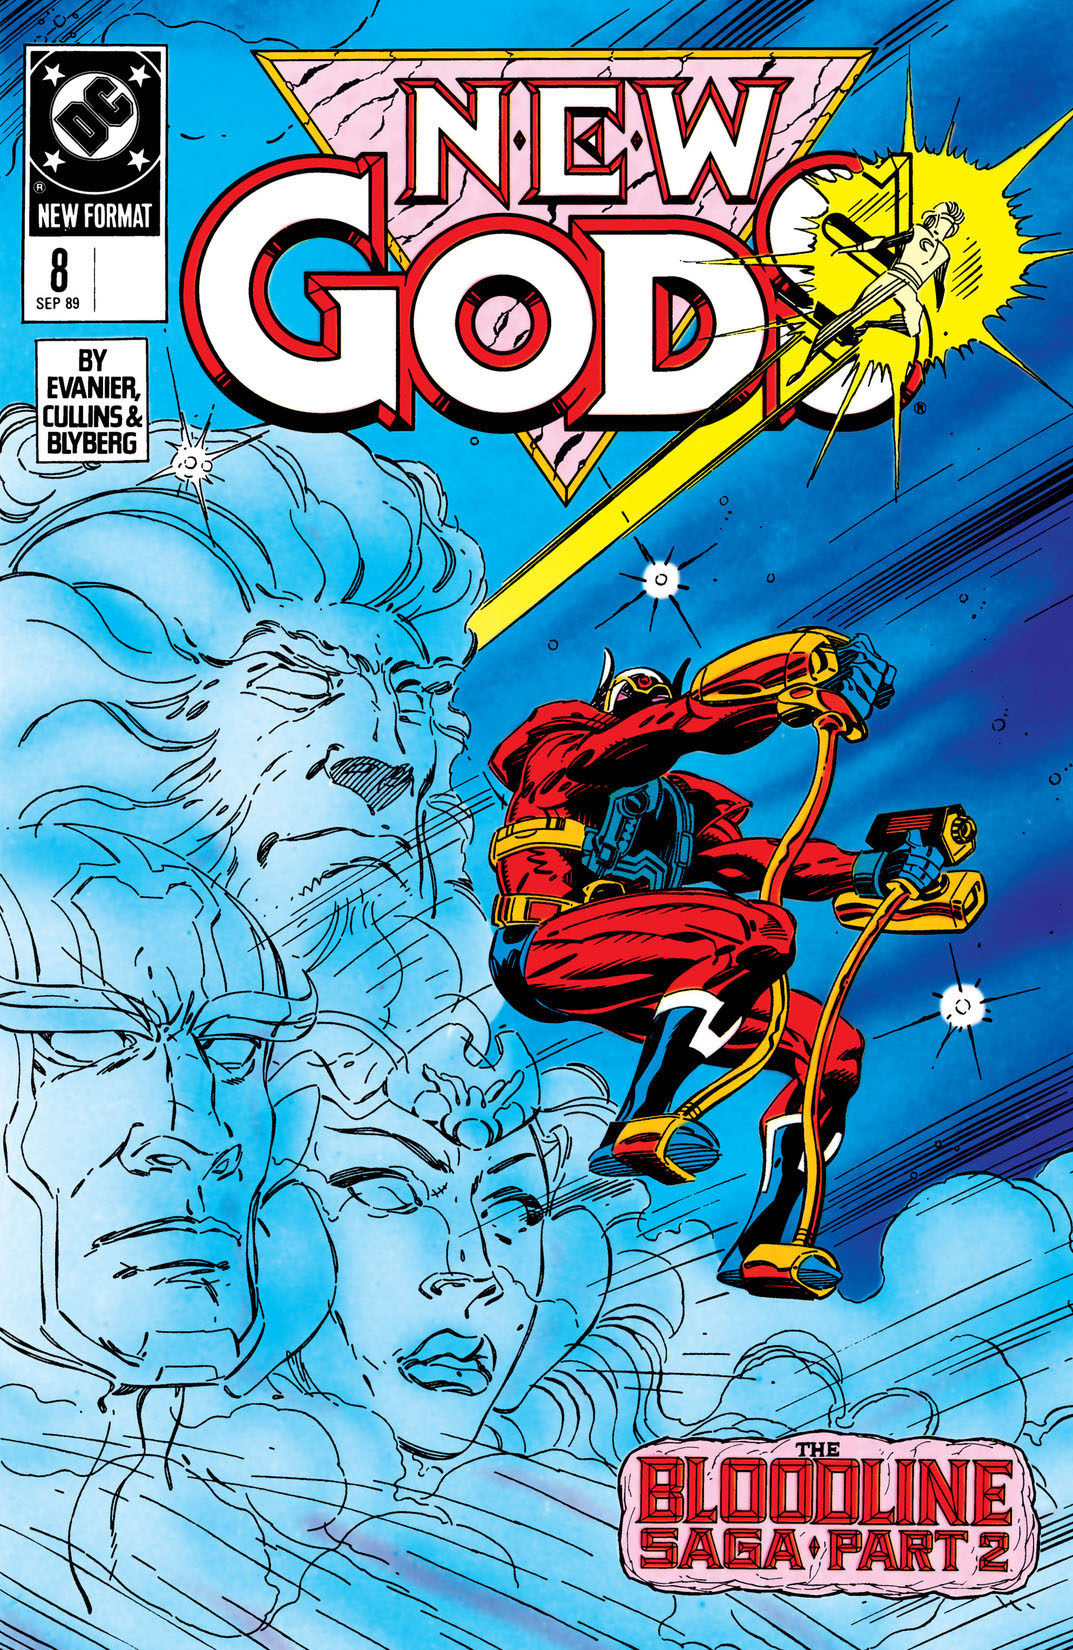 New Gods (1989-) #8 preview images